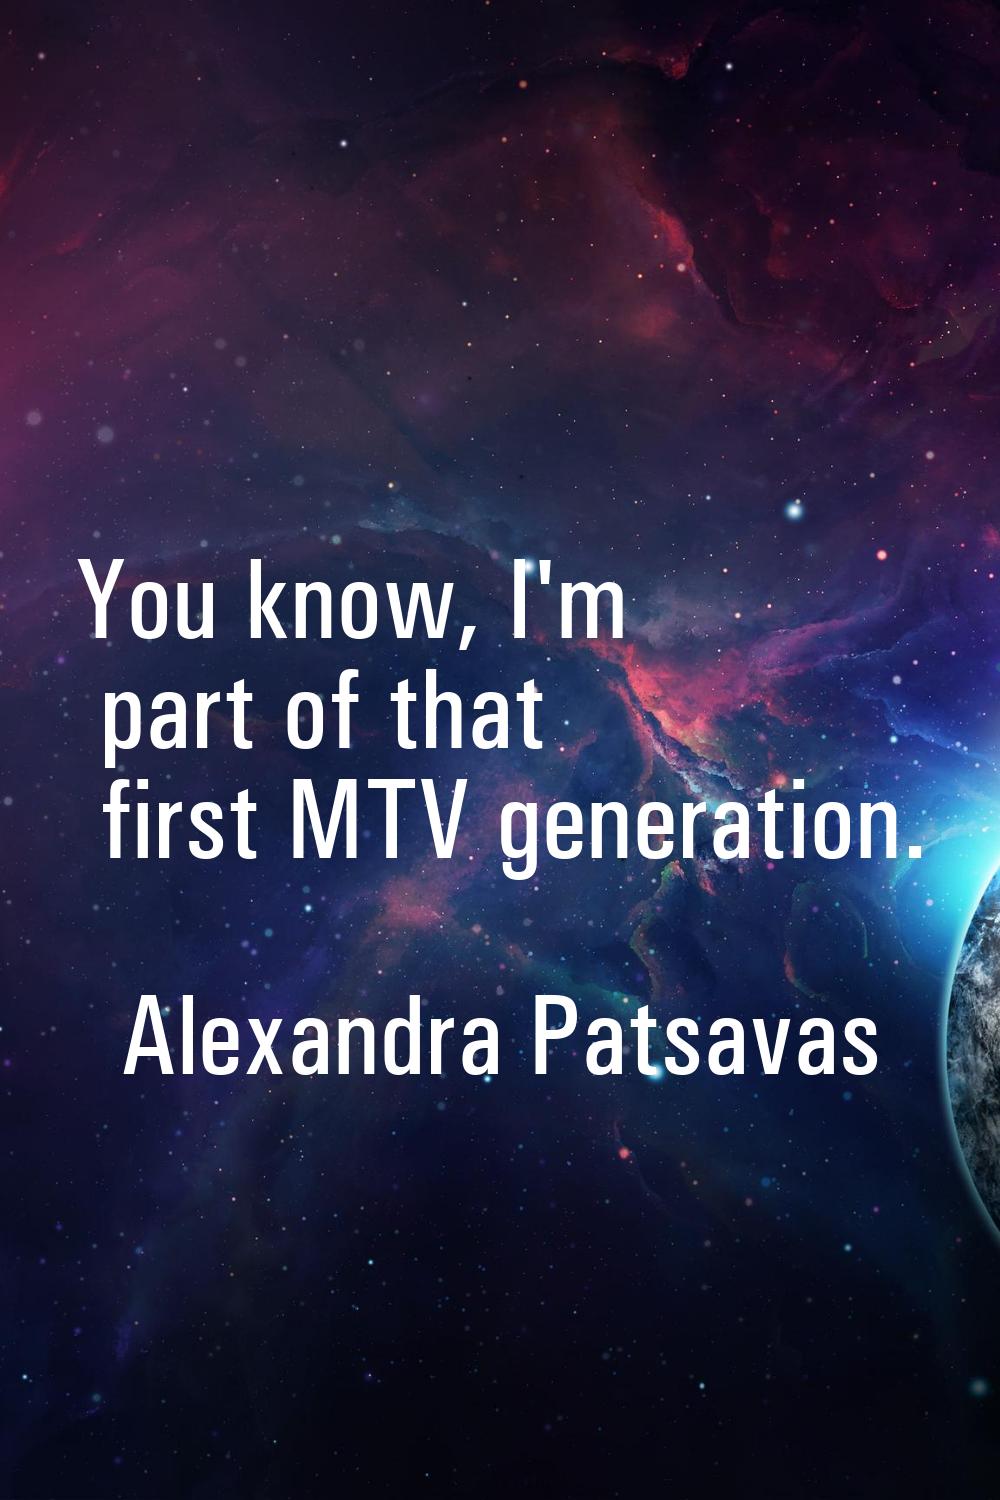 You know, I'm part of that first MTV generation.